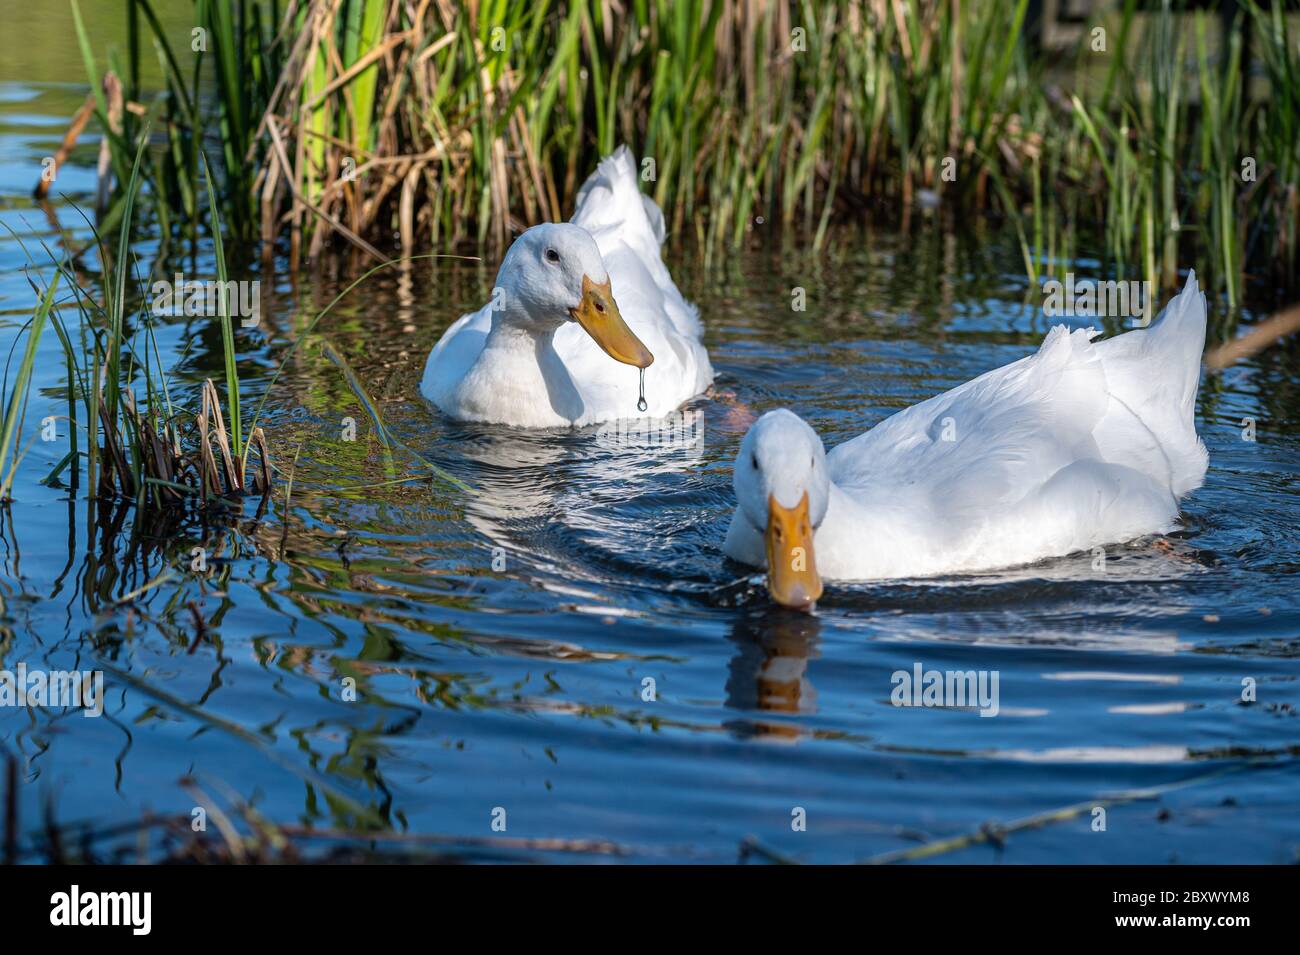 Male pekin duck, also known as Aylesbury or Long Island Duck, swimming on a calm, still lake Stock Photo